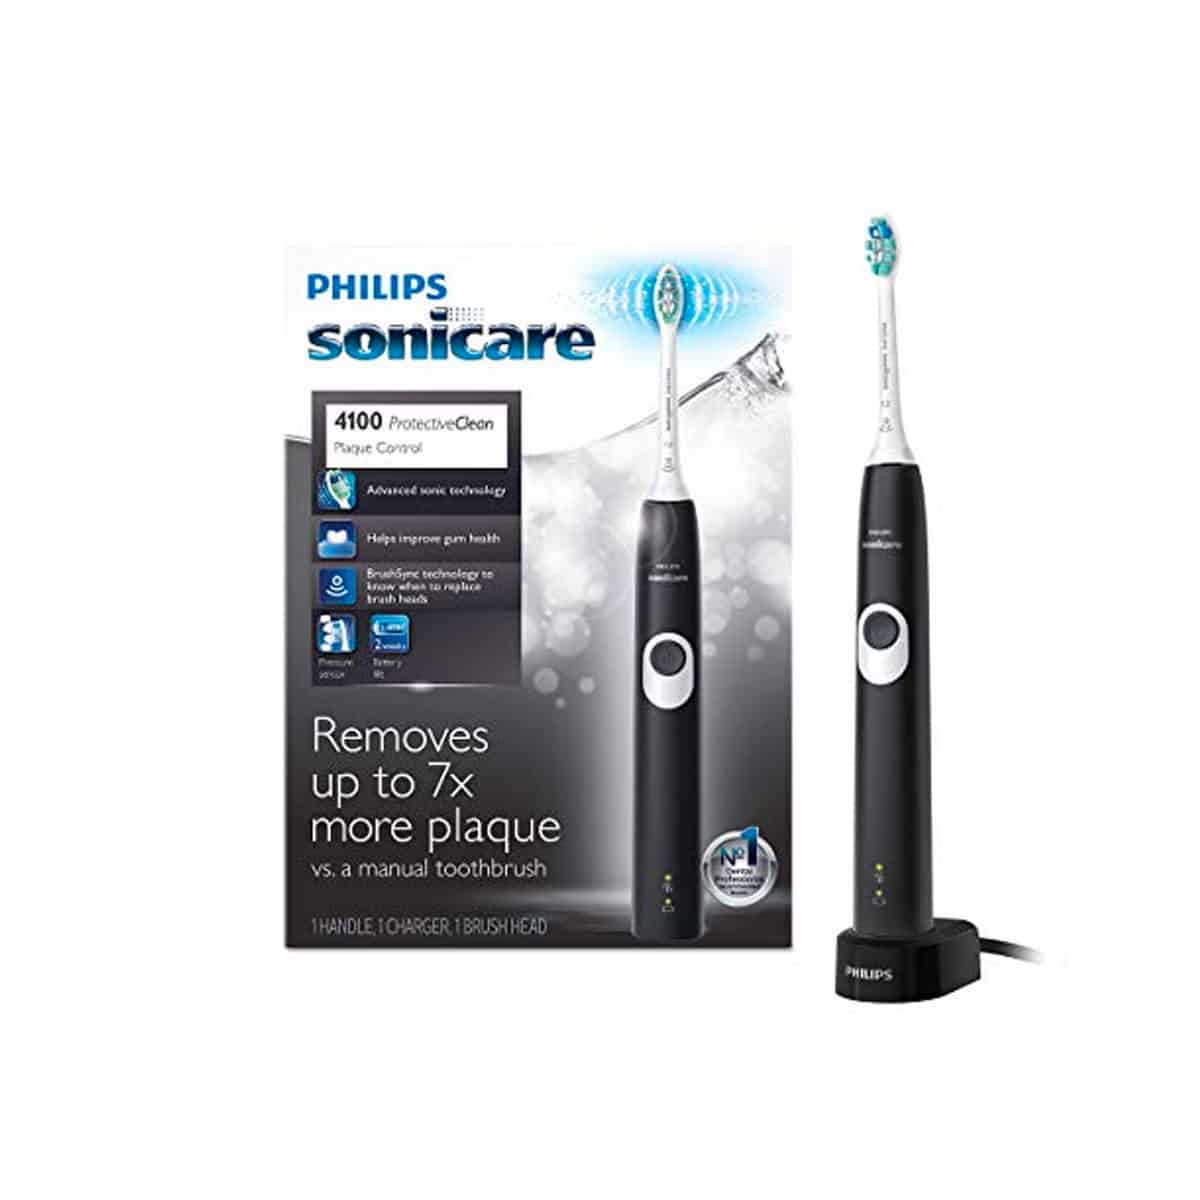 Philips Sonicare Protective Clean 4100 Electric Rechargeable Toothbrush